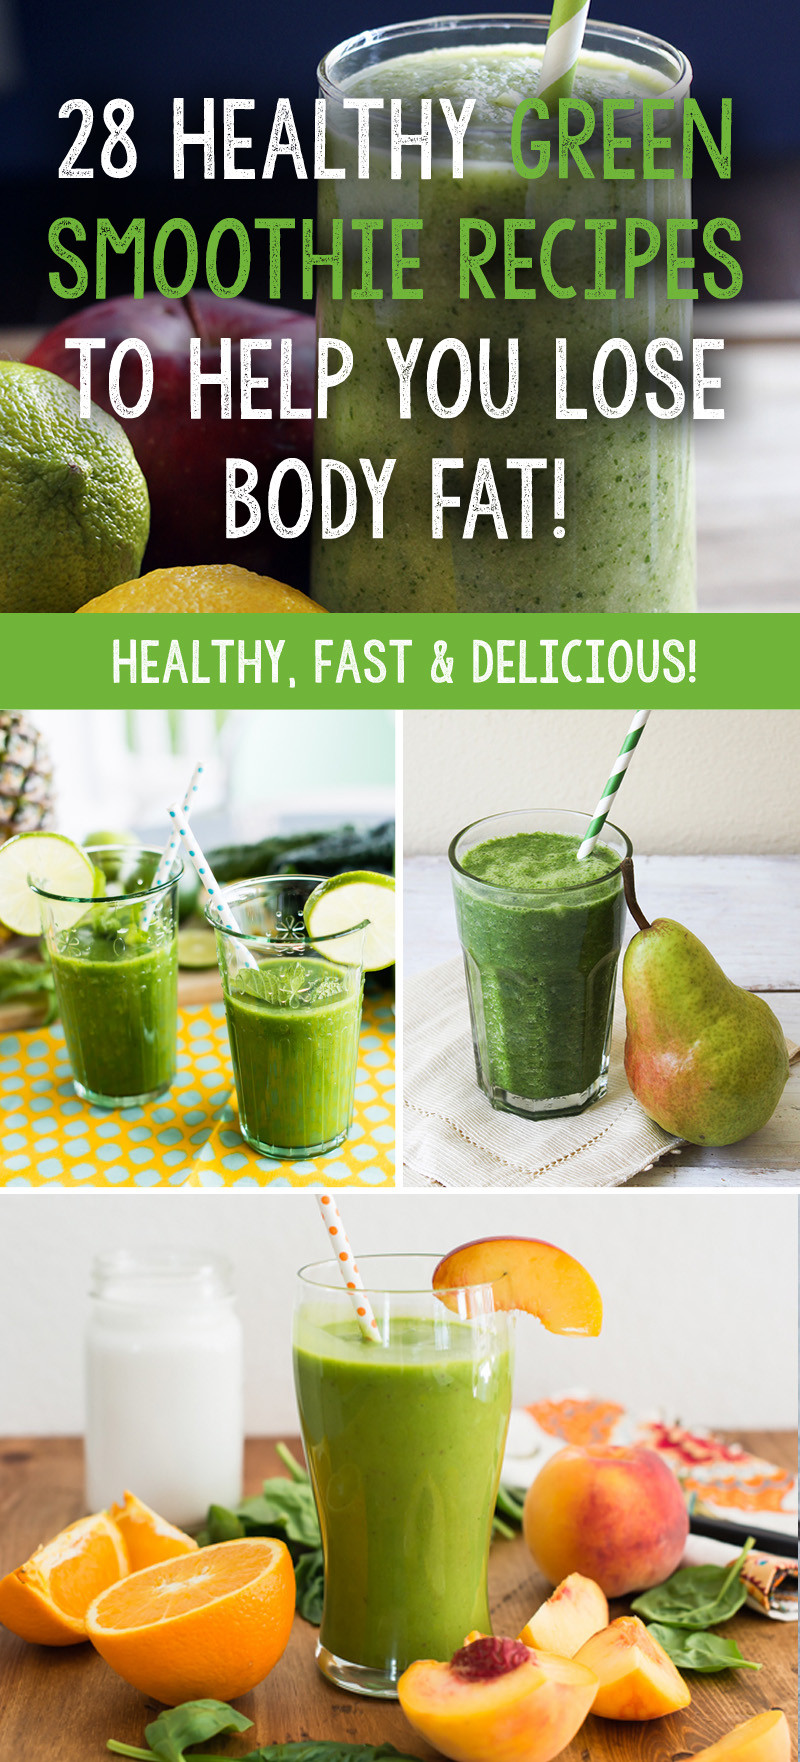 Green Smoothies Recipes
 28 Healthy Green Smoothie Recipes To Help You Lose Body